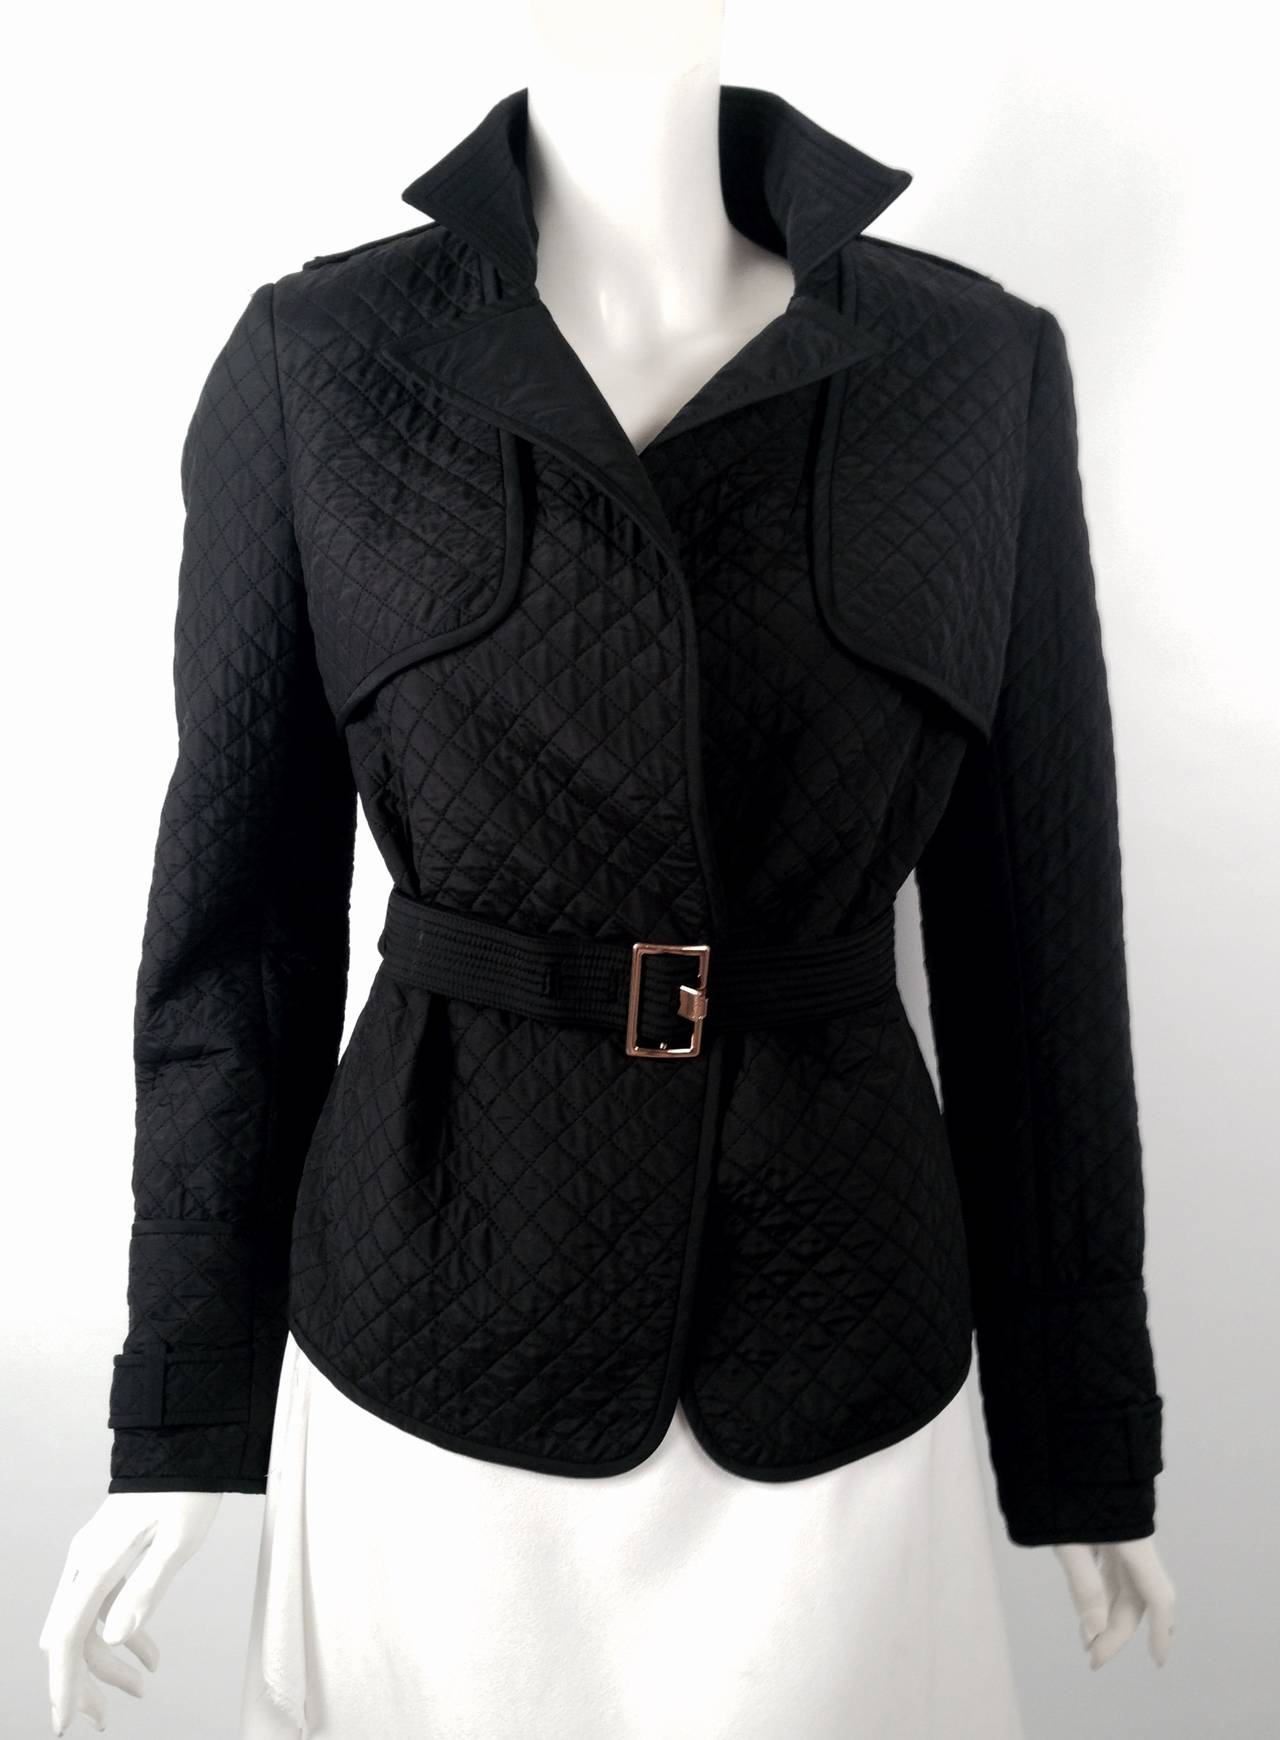 Yves Saint Laurent Diamond Quilted Jacket is the perfect companion when exploring the Left Bank.  Features include luxurious, water-repellant fabric, epaulets, belted waist, and sleeve straps.  Storm patches and rear vent make this coat functional